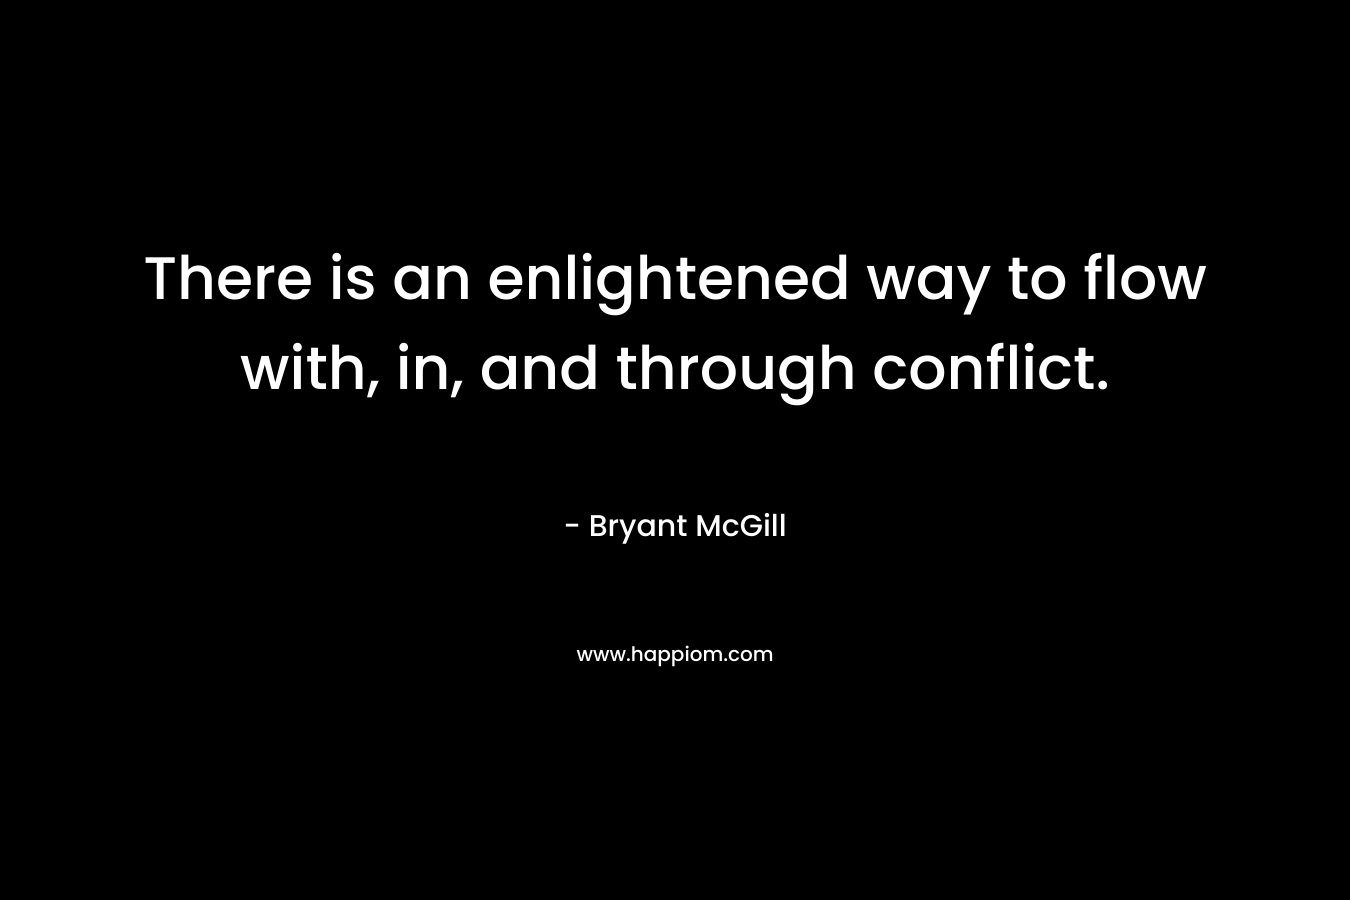 There is an enlightened way to flow with, in, and through conflict. – Bryant McGill